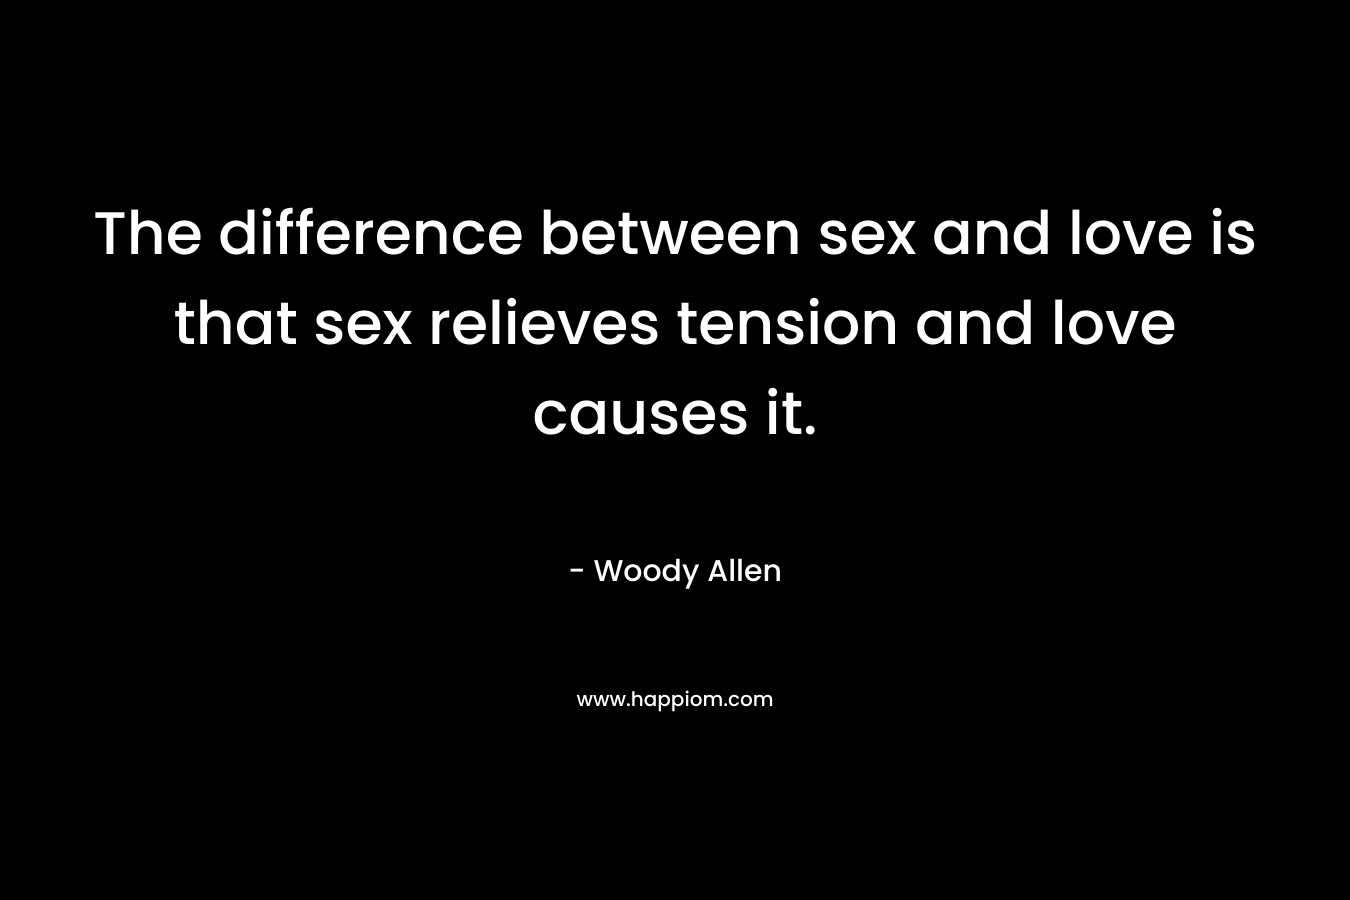 The difference between sex and love is that sex relieves tension and love causes it.